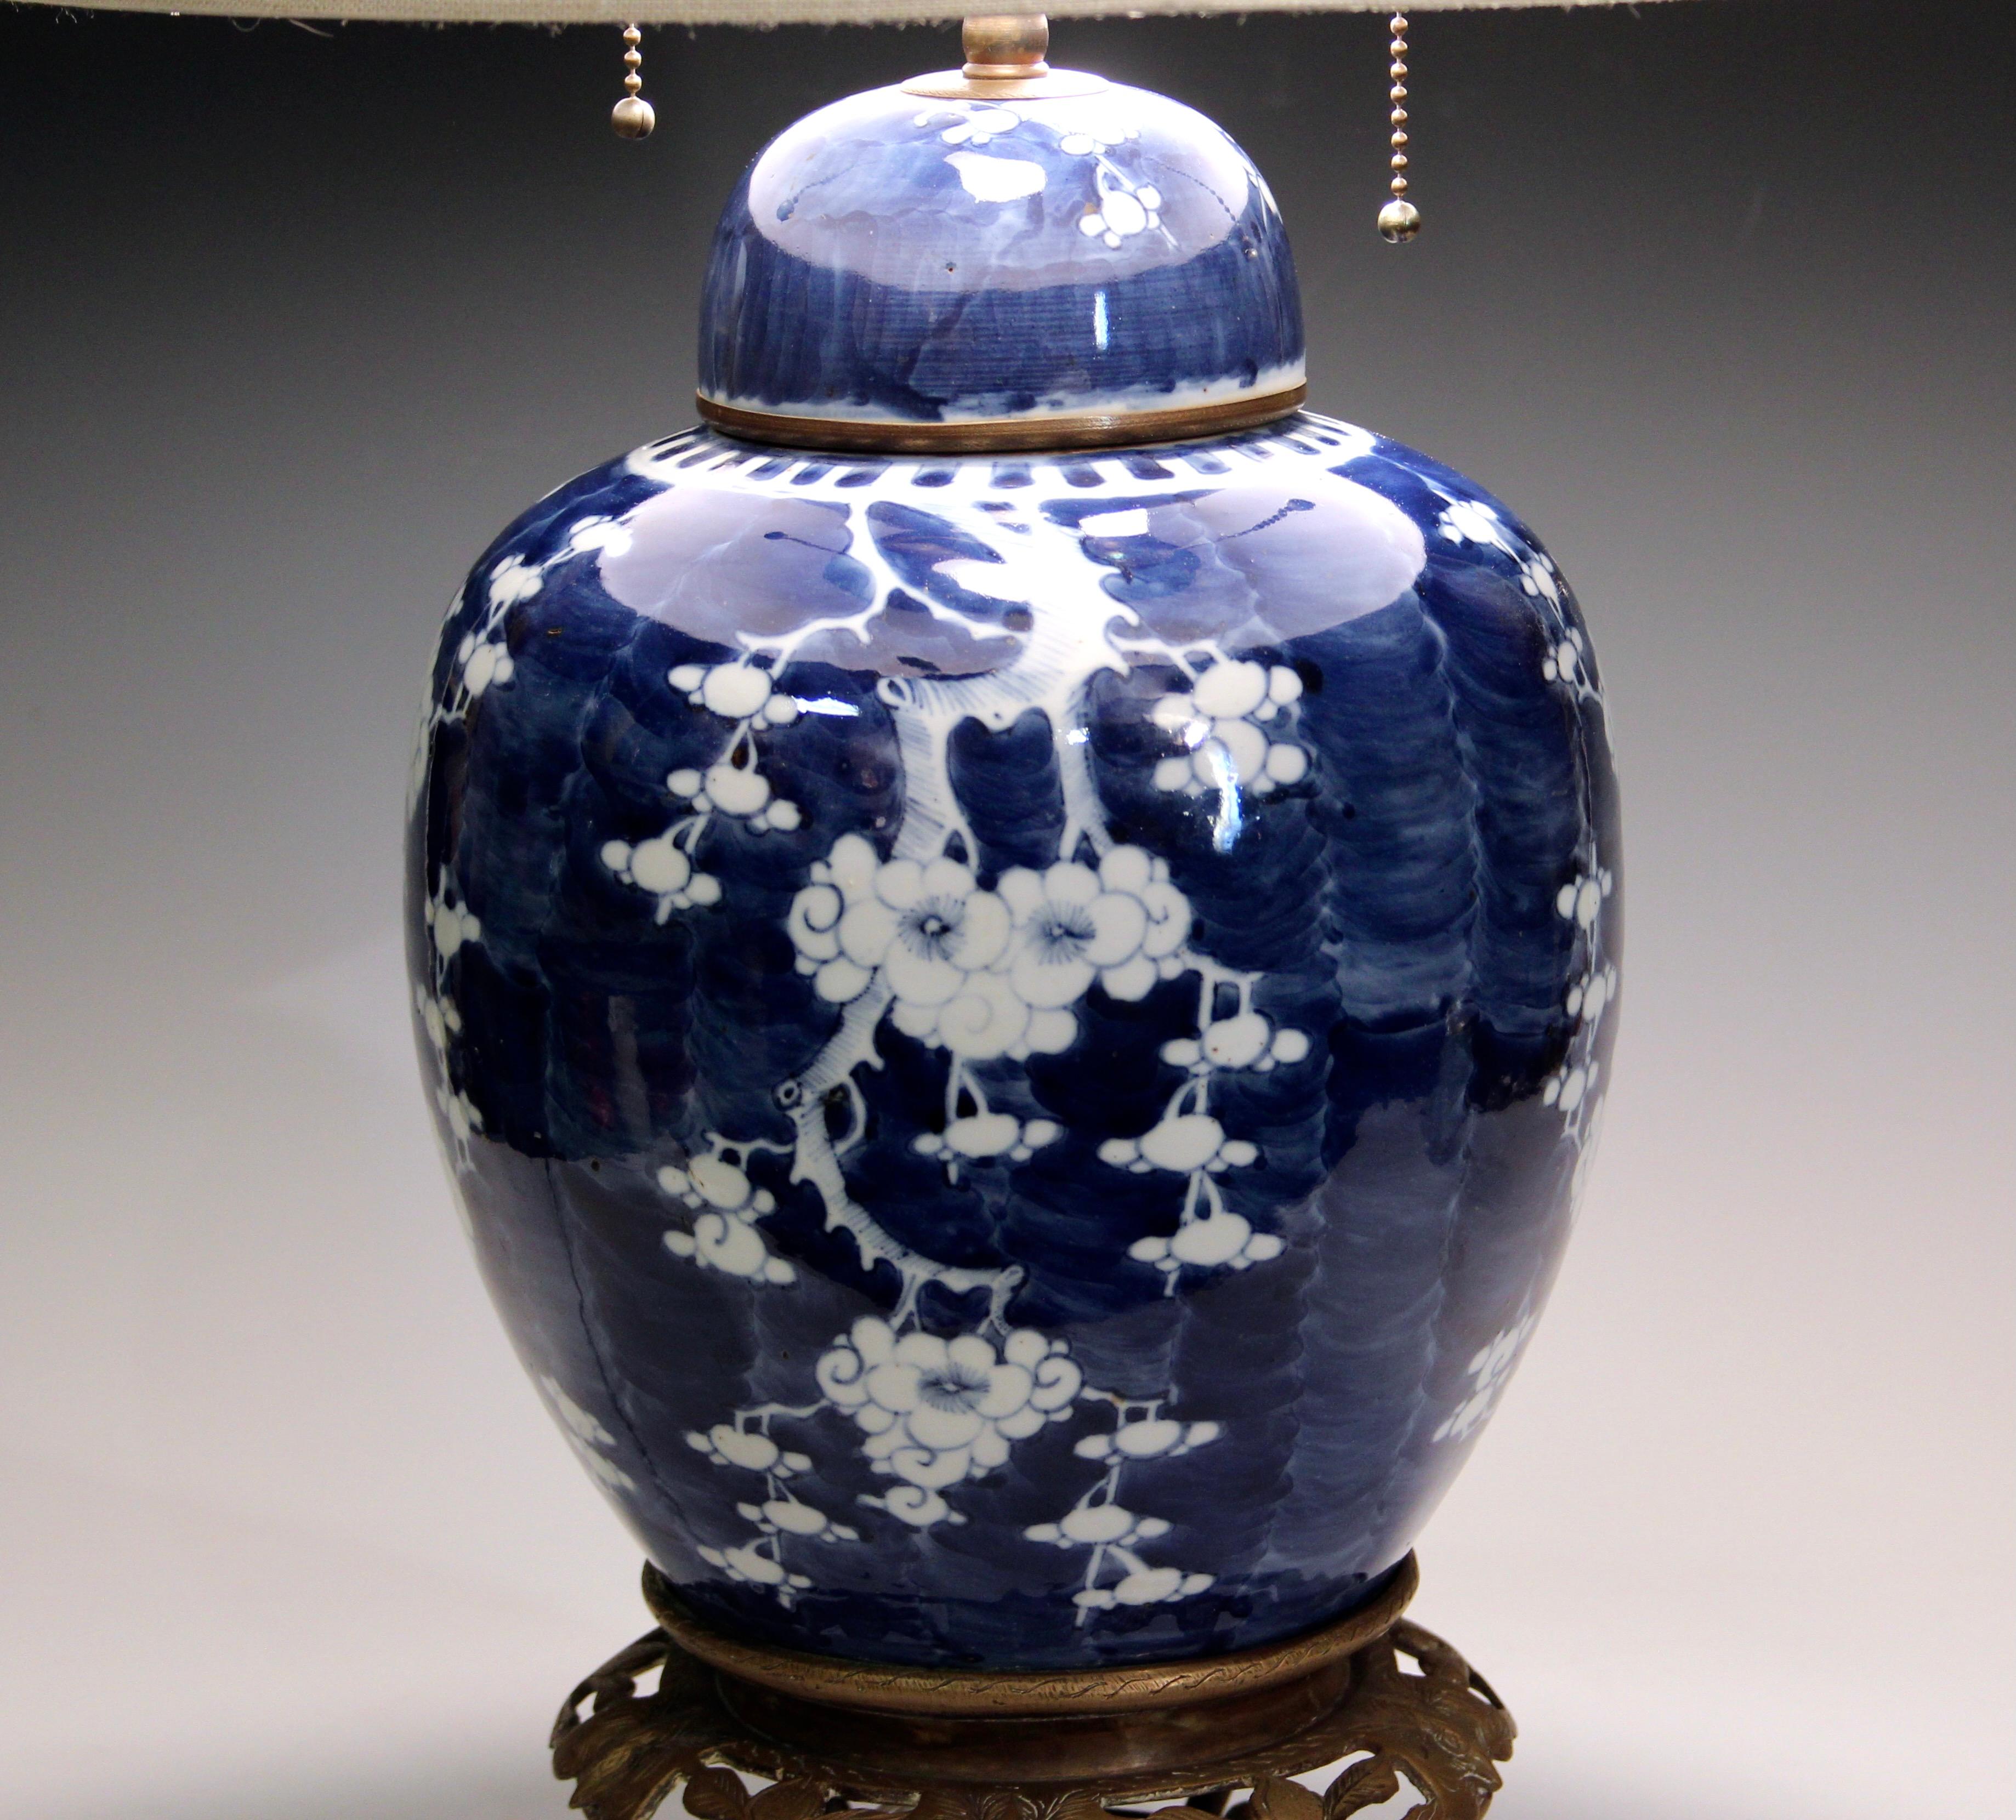 Antique Chinese porcelain blue and white Hawthorn pattern ginger jar lamp. With original cover. China stamp, circa 1910. Nice old brass hardware with adjustable double S sockets, smooth pulls, shade riser, etc. New wiring. 28